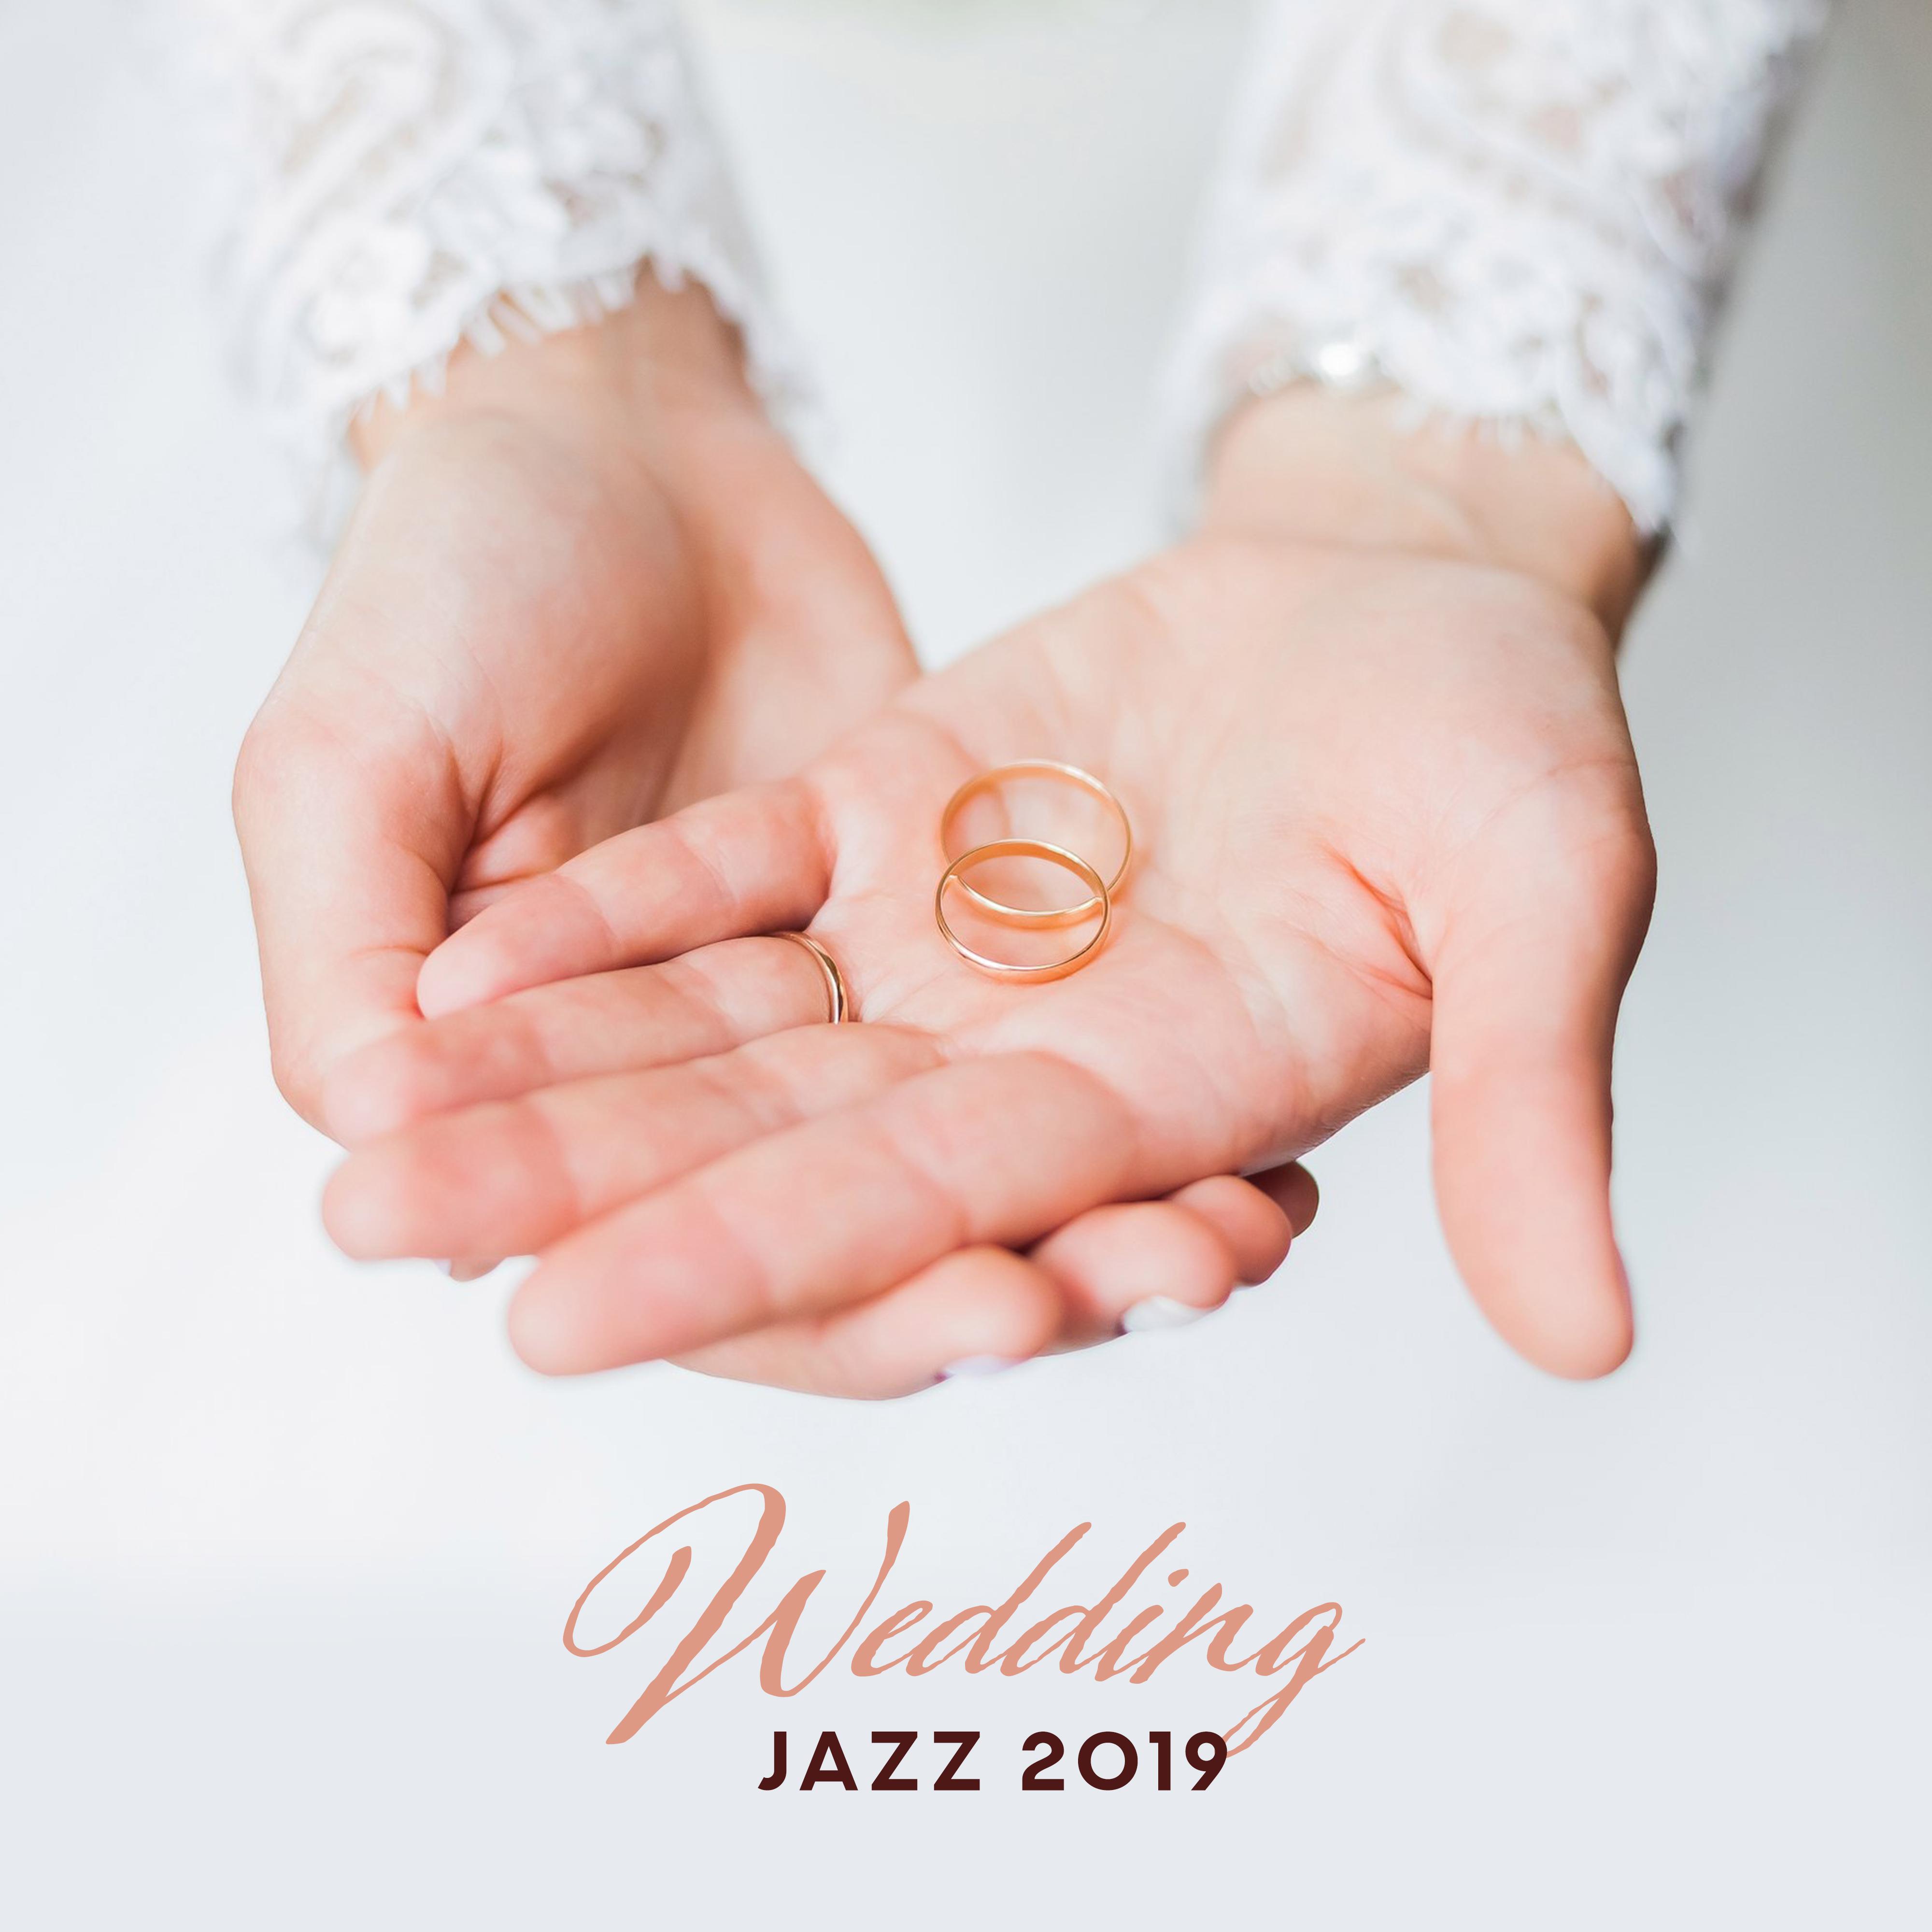 Wedding Jazz 2019 – Romantic Music for Lovers, Jazz for Special Day, Instrumental Jazz Music Ambient